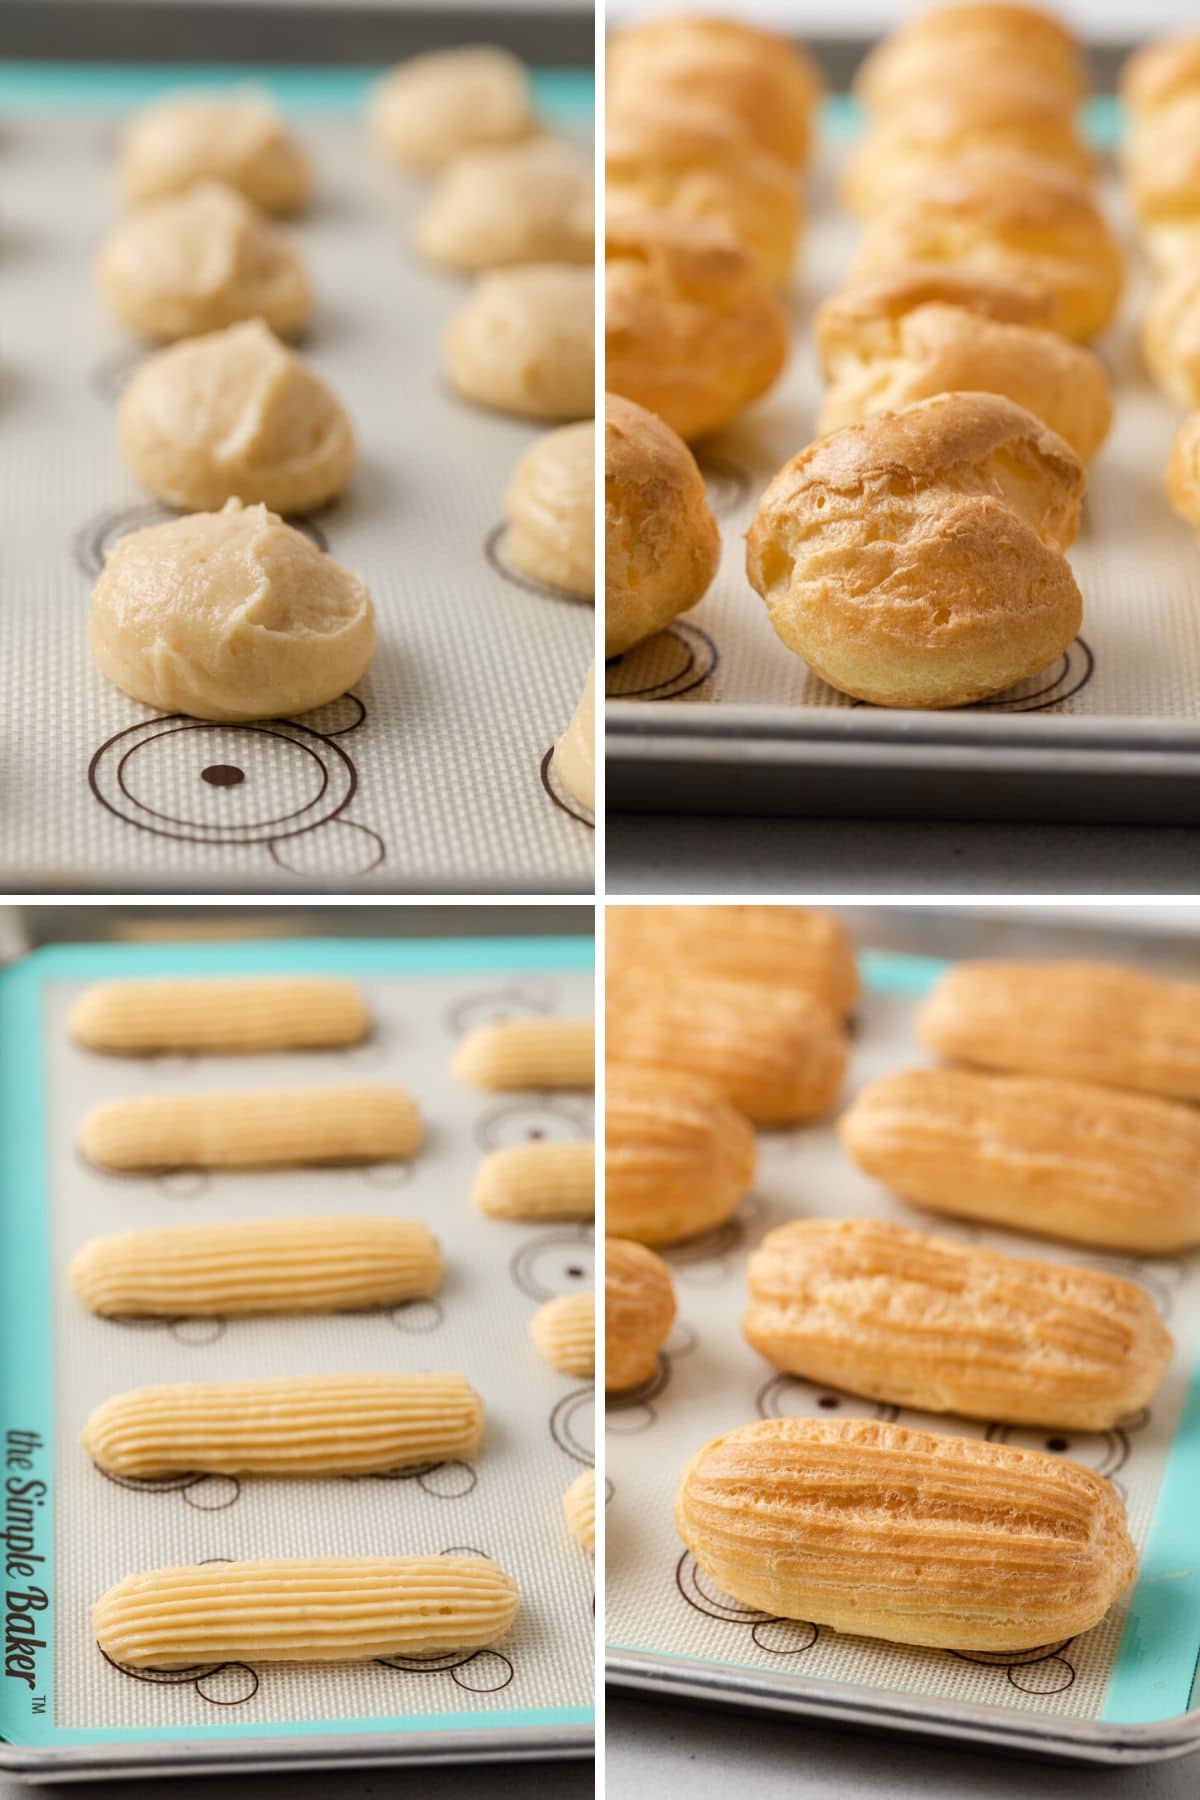 Process shots for baking choux pastry.